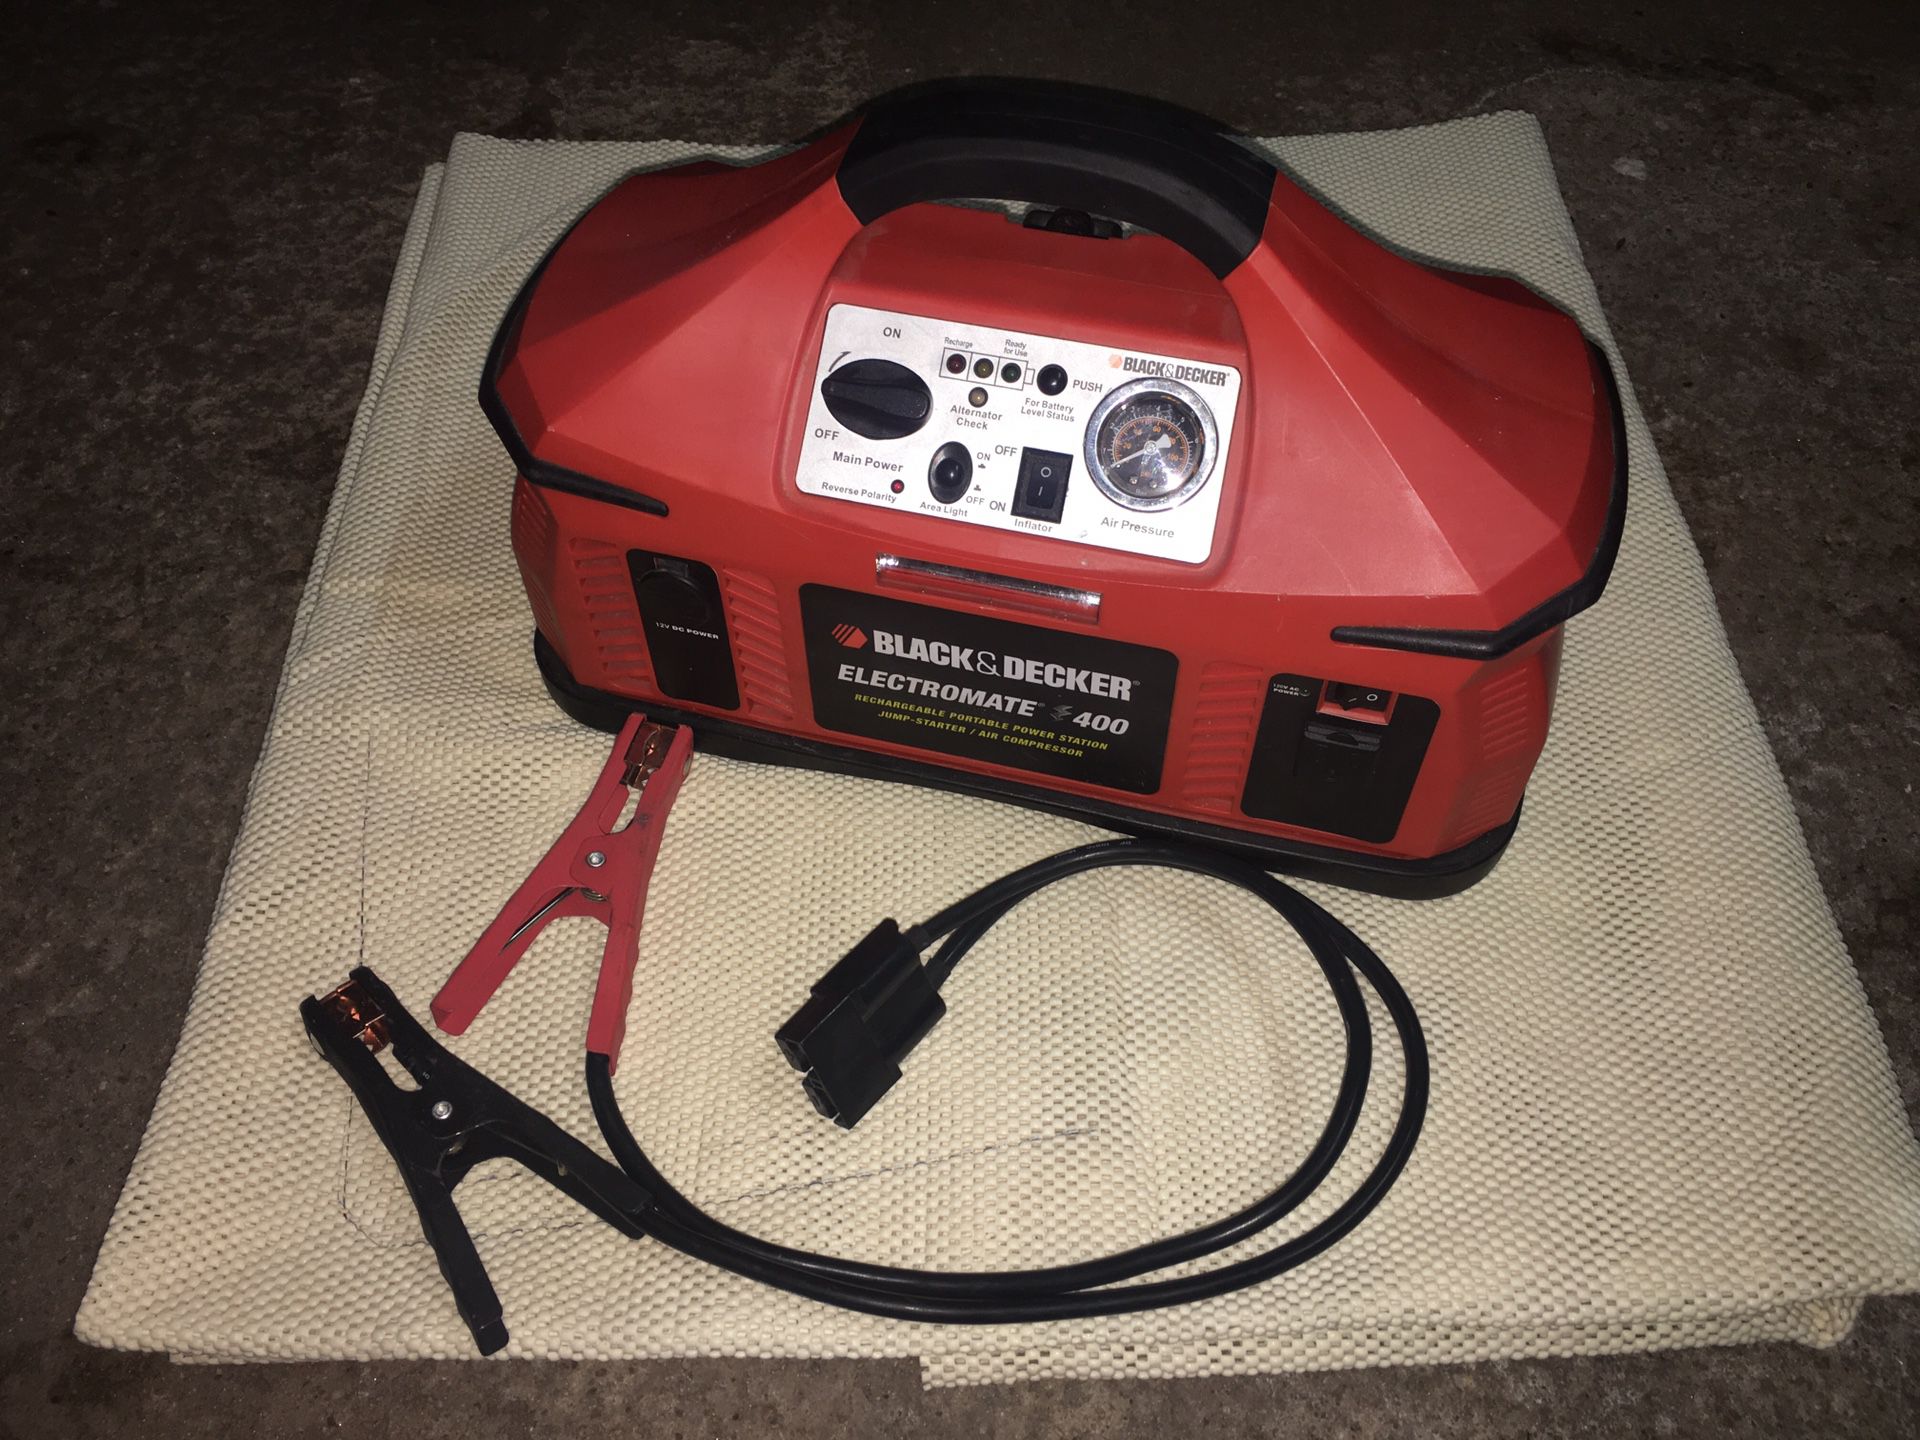 Black And Decker Jump-Starter With Inflator.